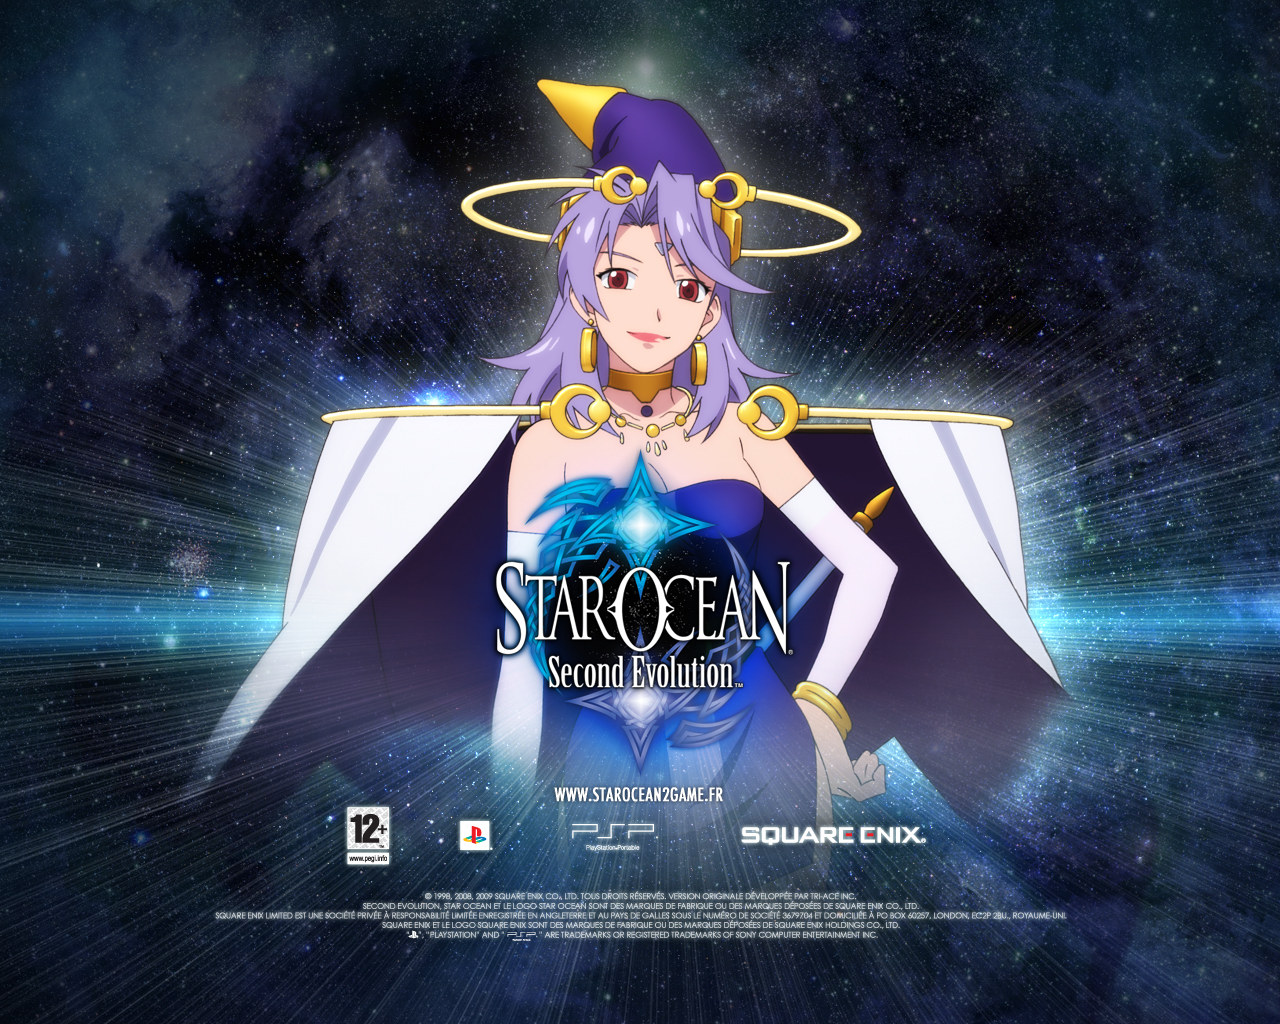 Star ocean the second. Star Ocean second Evolution PSP. Star Ocean: second Evolution от Square Enix. Т: Star Ocean – second Evolution. Star Ocean: the second story.